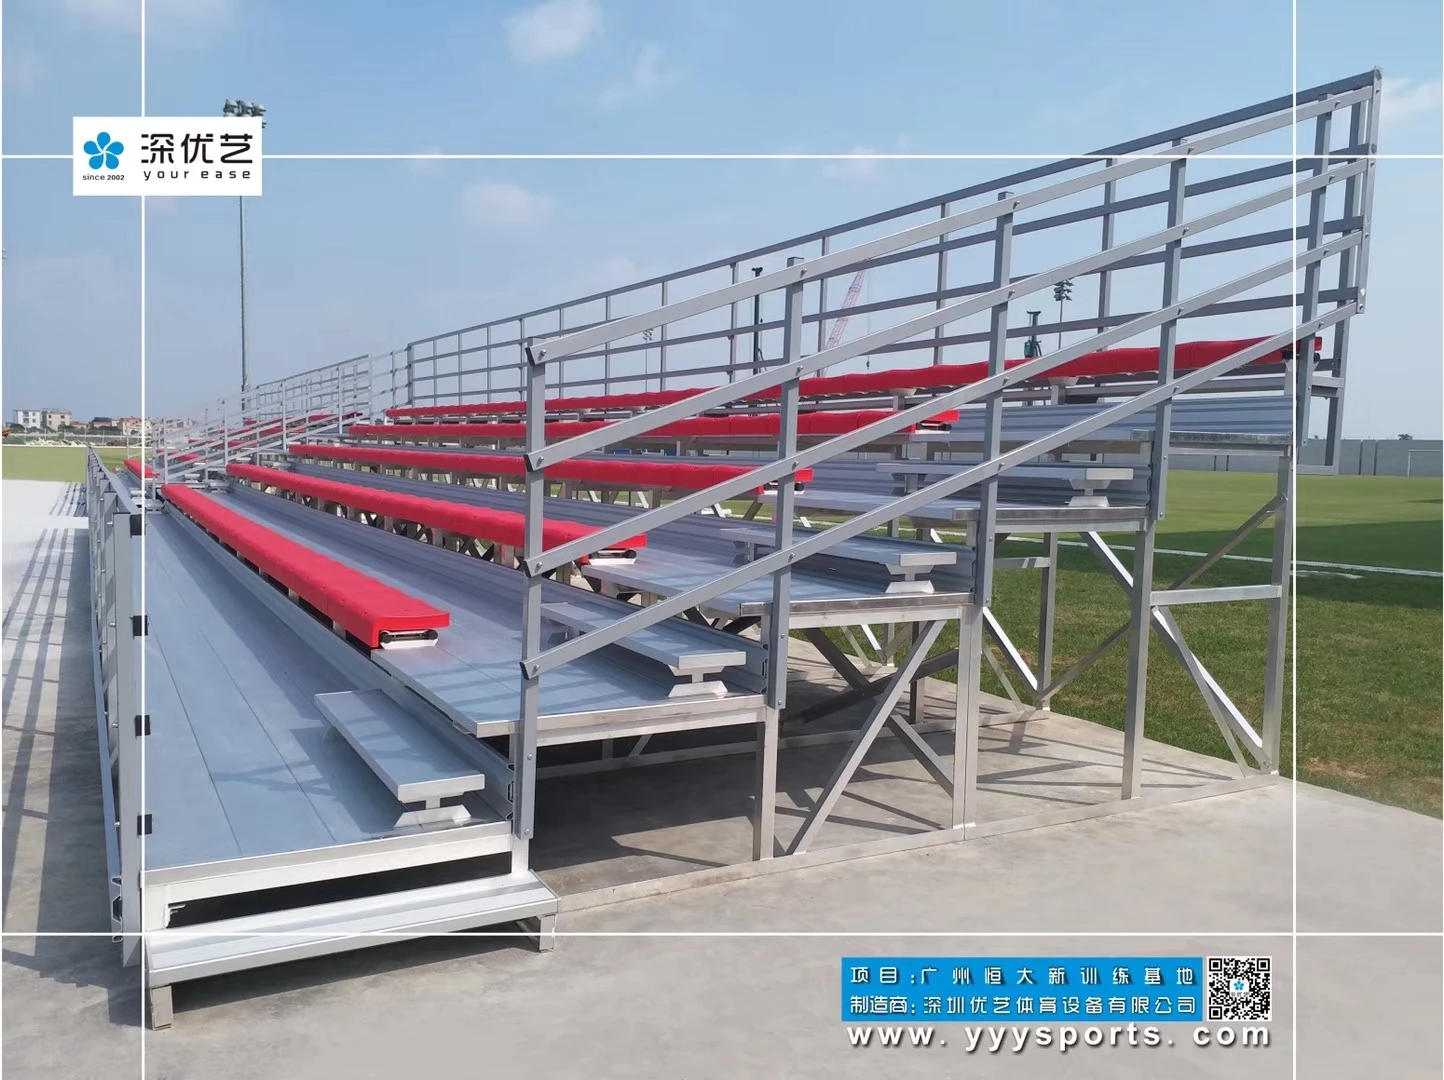 
Yourease football temporary grandstand seating for outdoor 